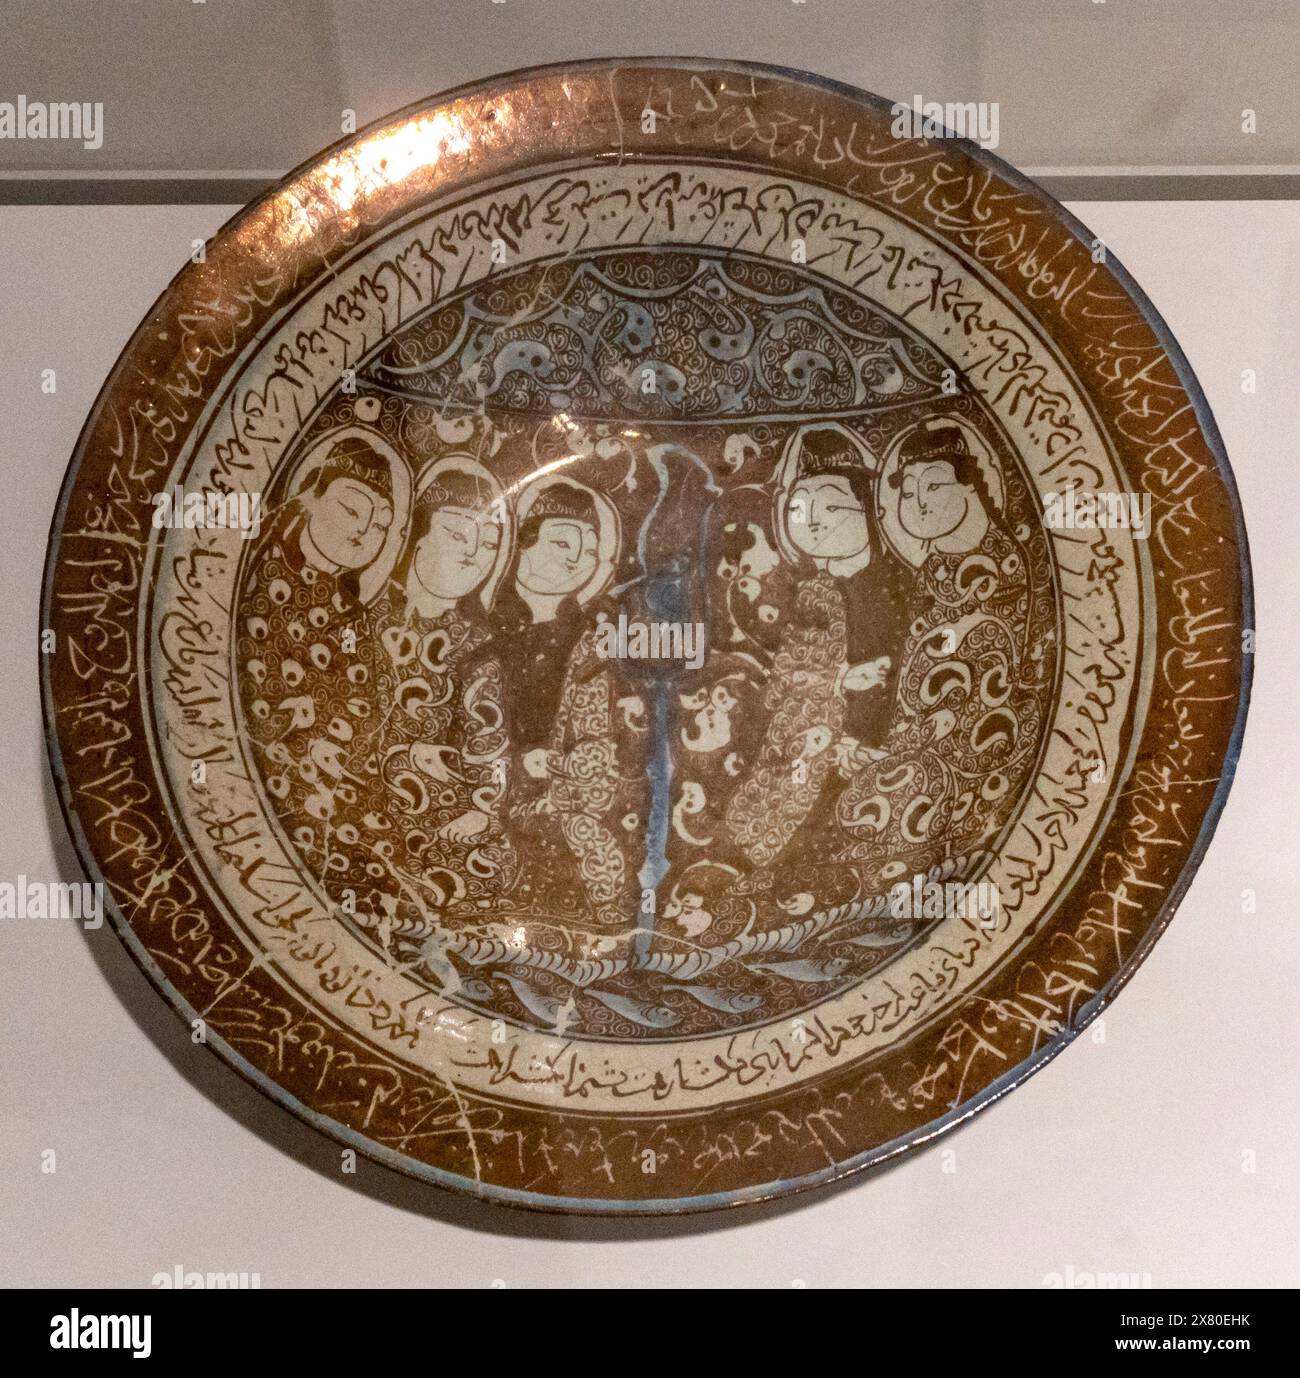 Seljuk luster plate with figural drawing, Iran, 13th century, BRookbly Museum, New York, USA Stock Photo